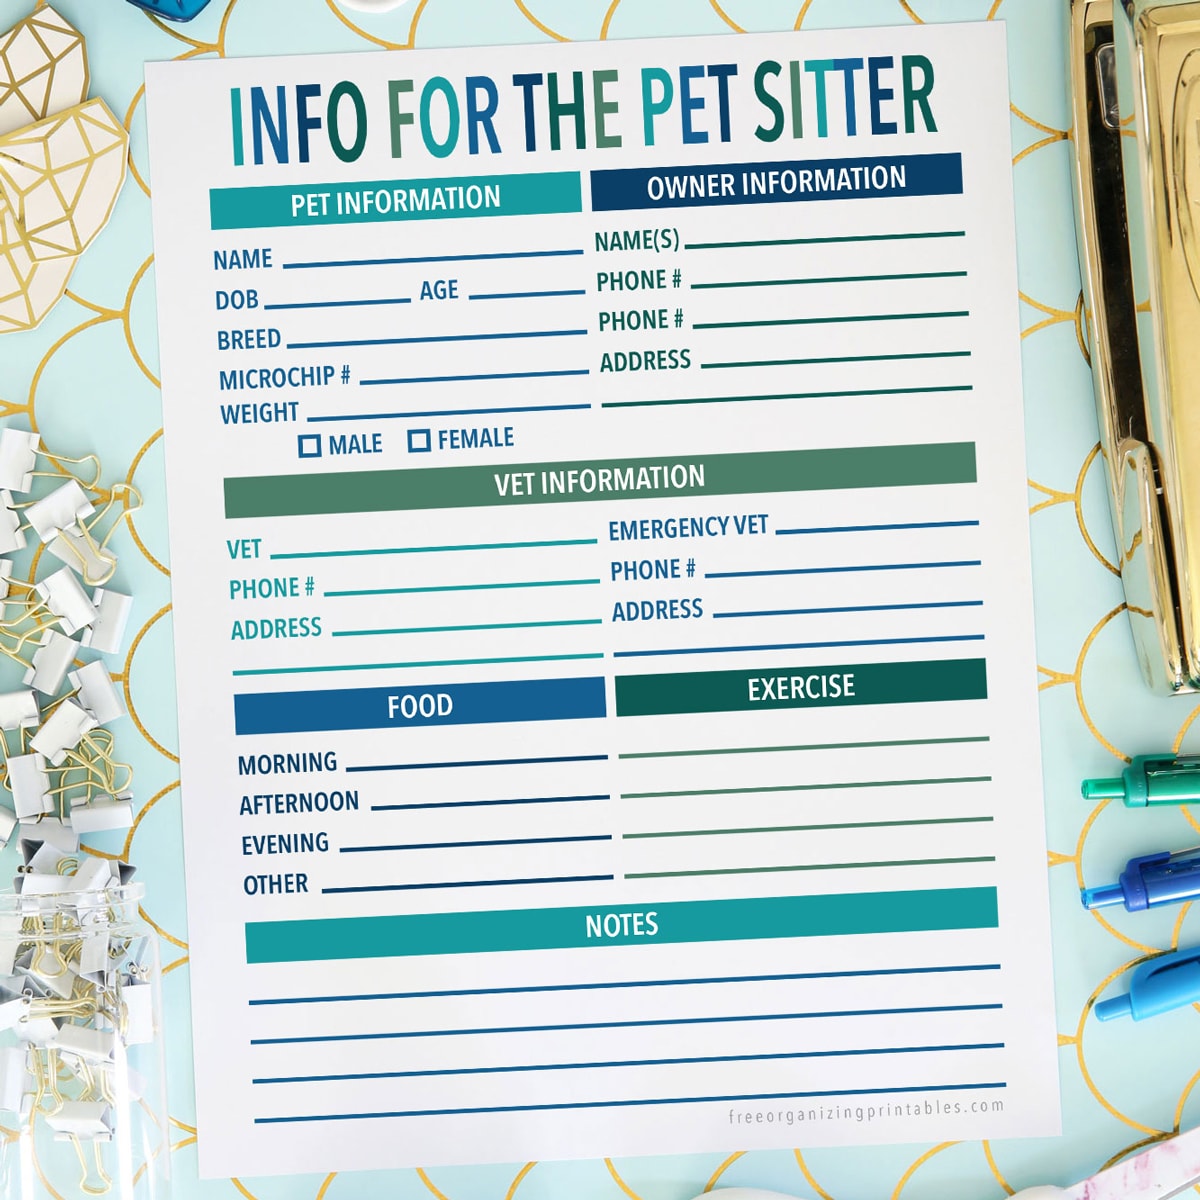 free-printable-pet-sitting-forms-free-organizing-printables-create-your-own-dog-care-binder